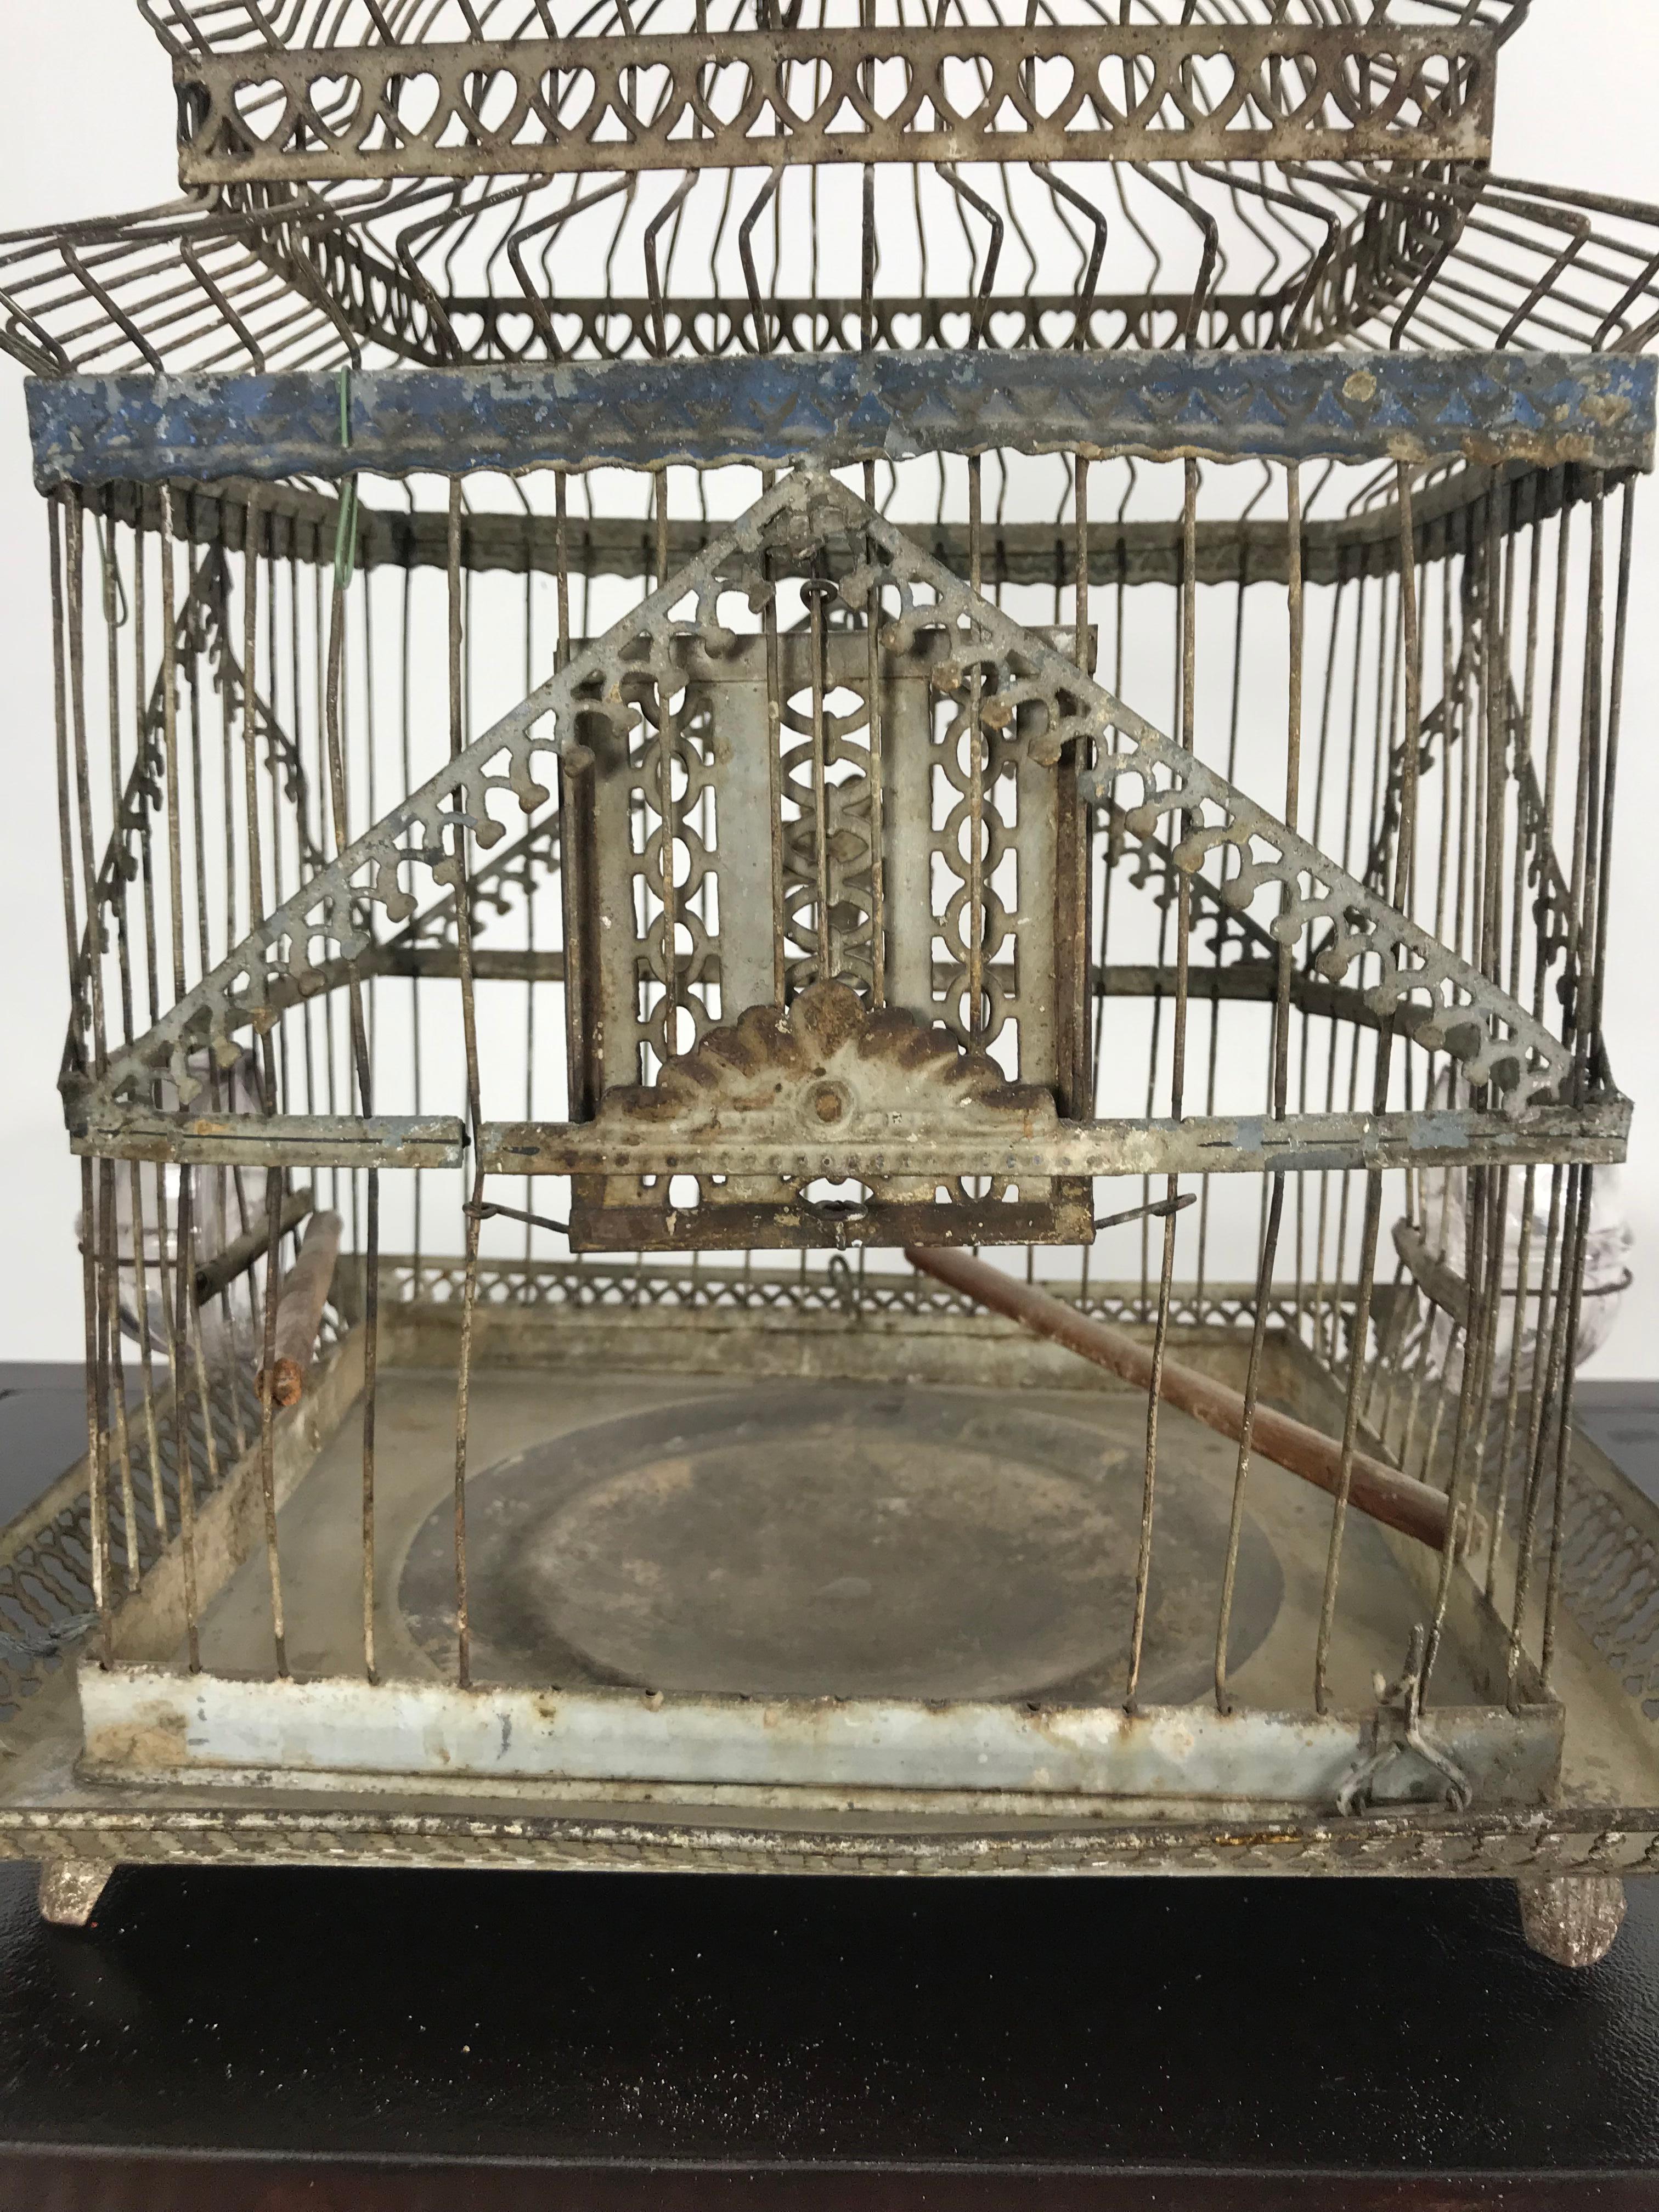 Charming 19th century architectural birdcage, hand painted decorated bottom.